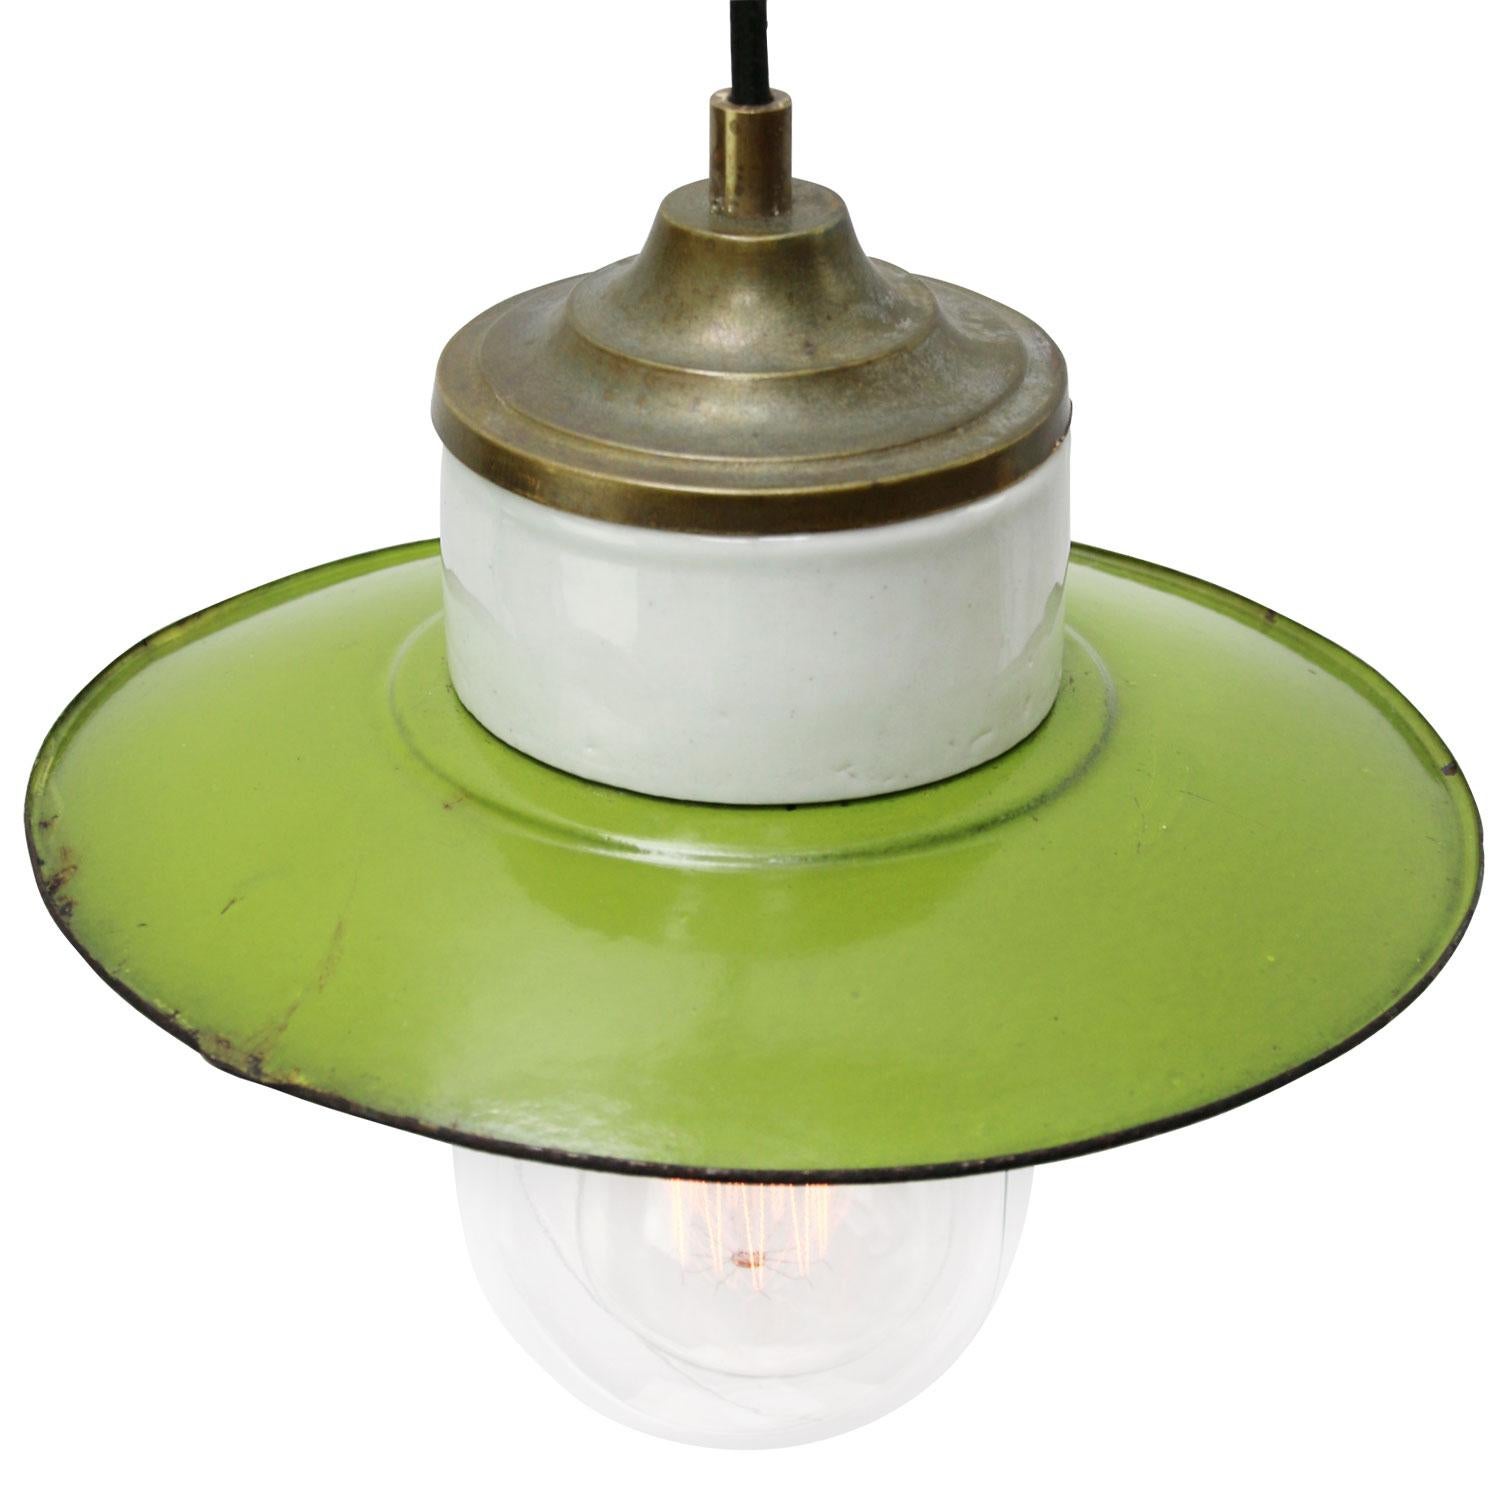 Porcelain industrial hanging lamp.
Green porcelain, brass and clear glass.
Enamel shade
2 conductors, no ground.

Weight: 1.40 kg / 3.1 lb

Priced per individual item. All lamps have been made suitable by international standards for